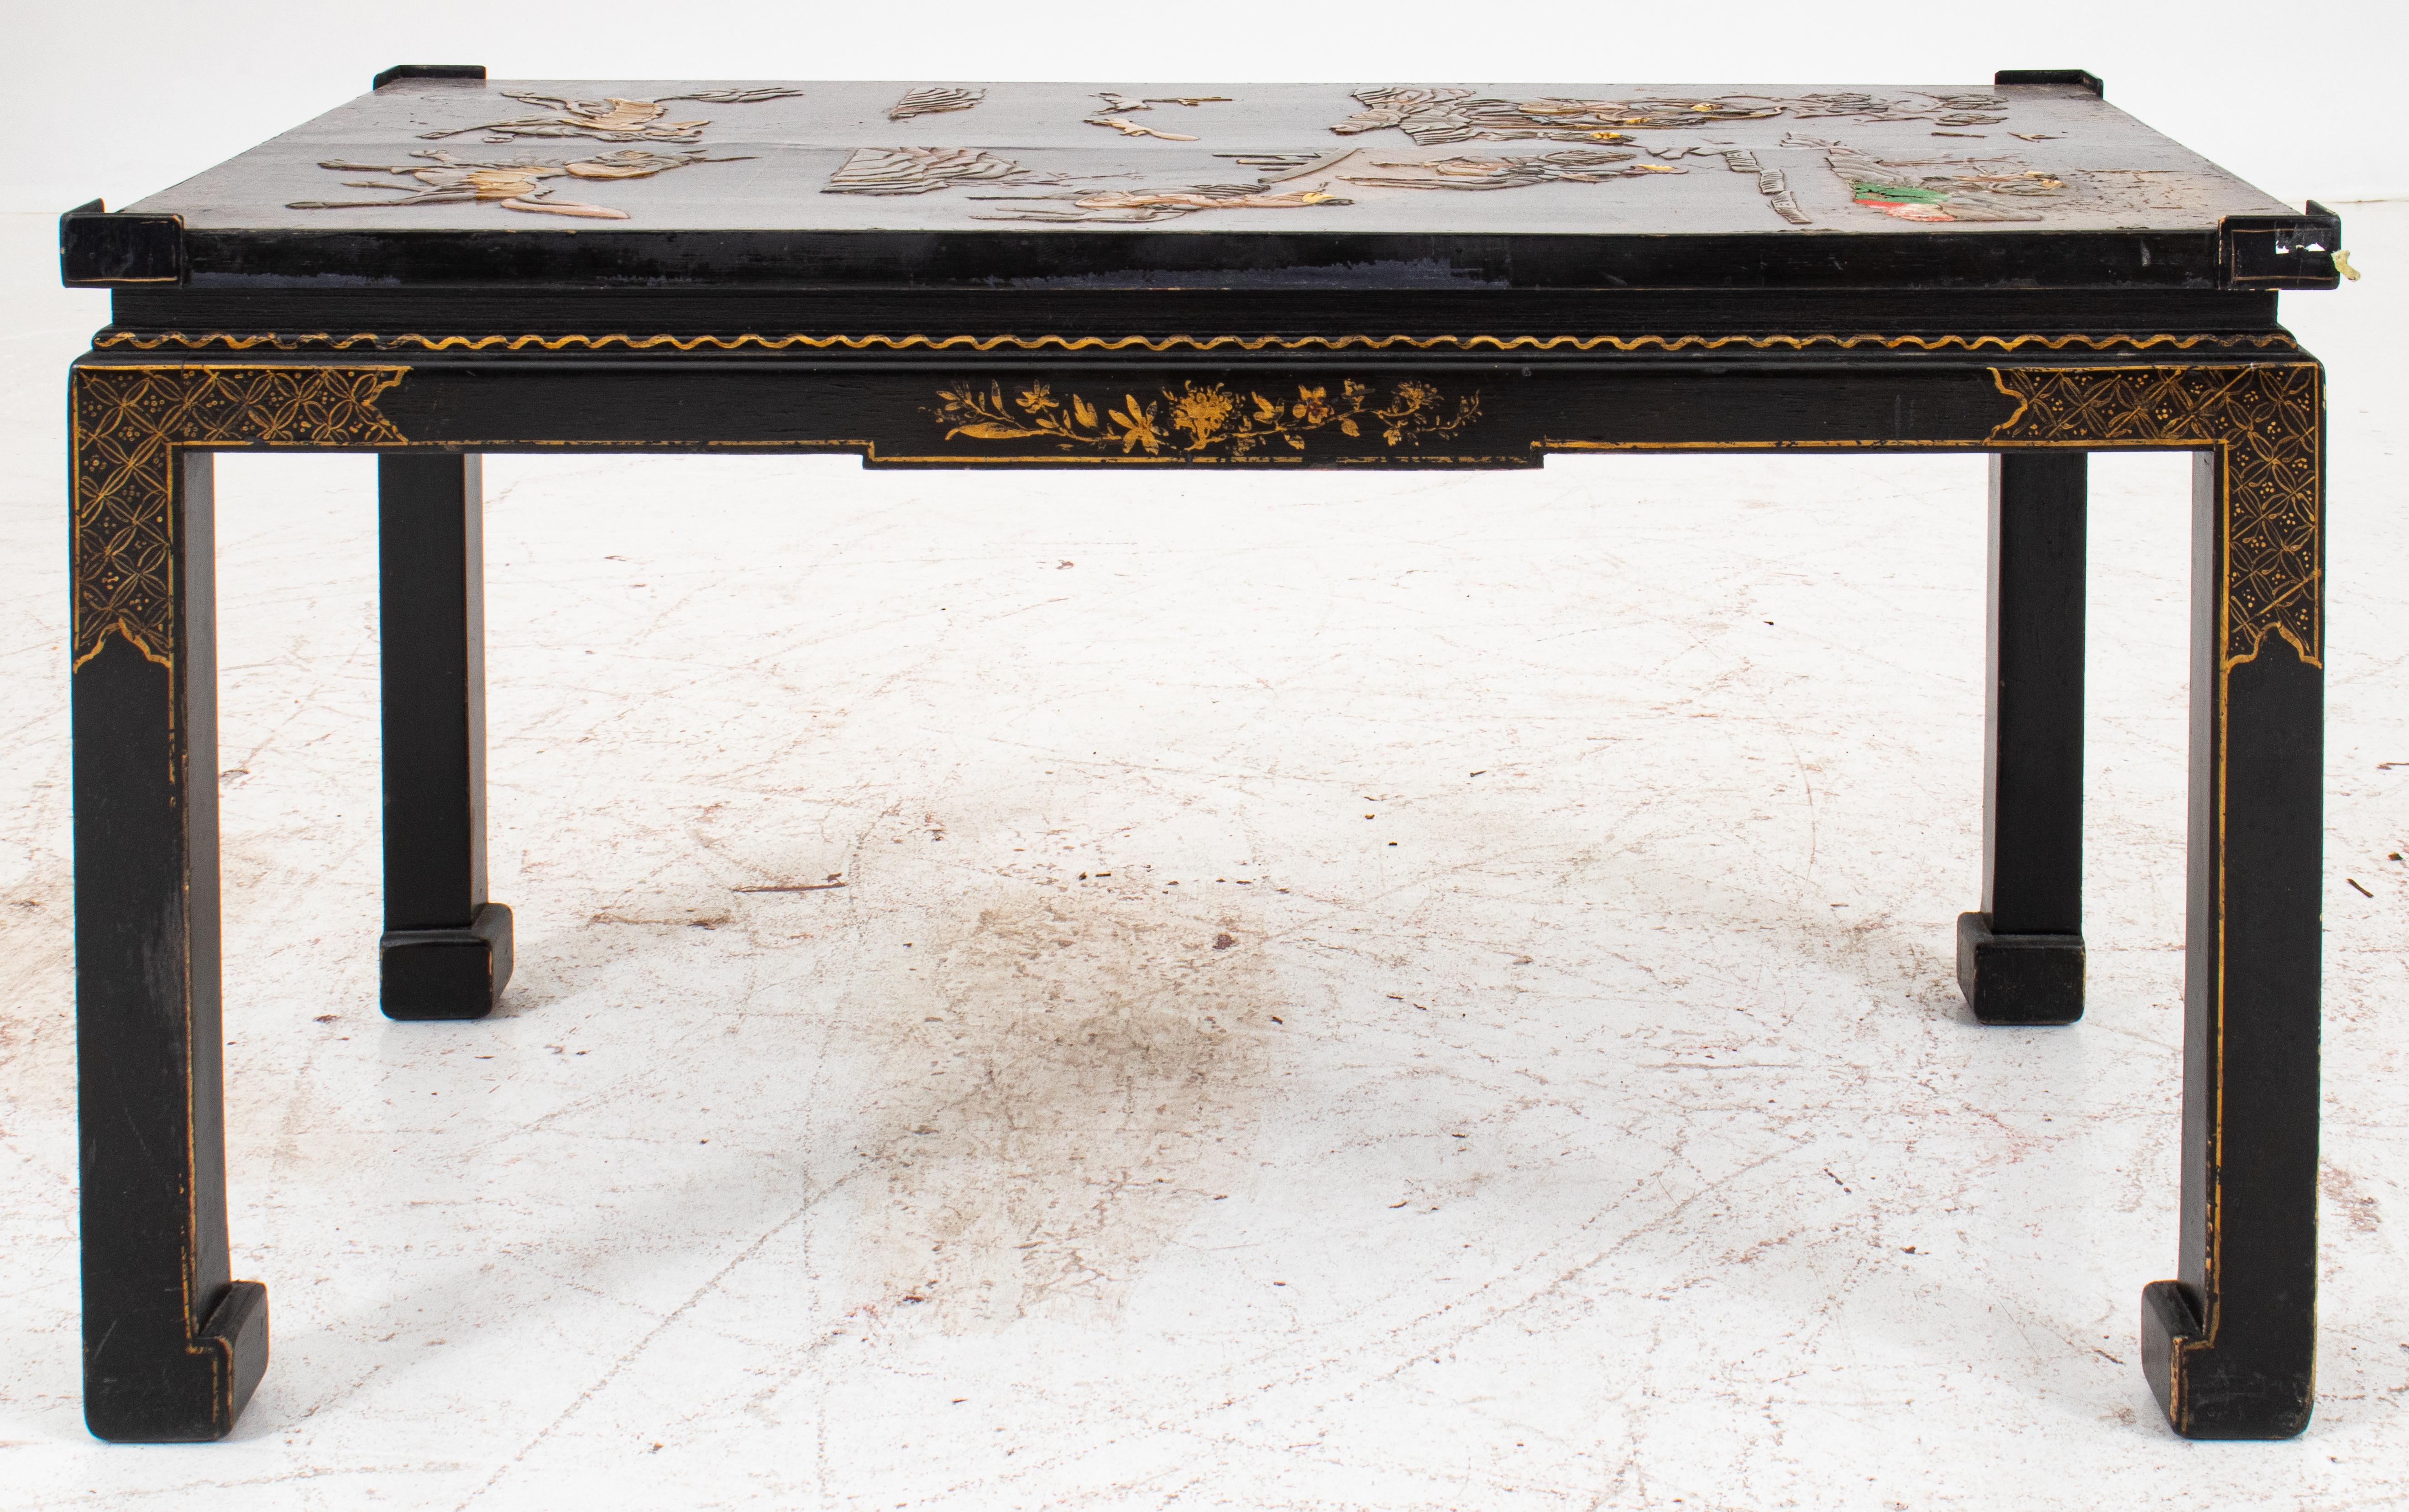 Chinese Hardstone Inlaid Panel Mounted as a Table 2